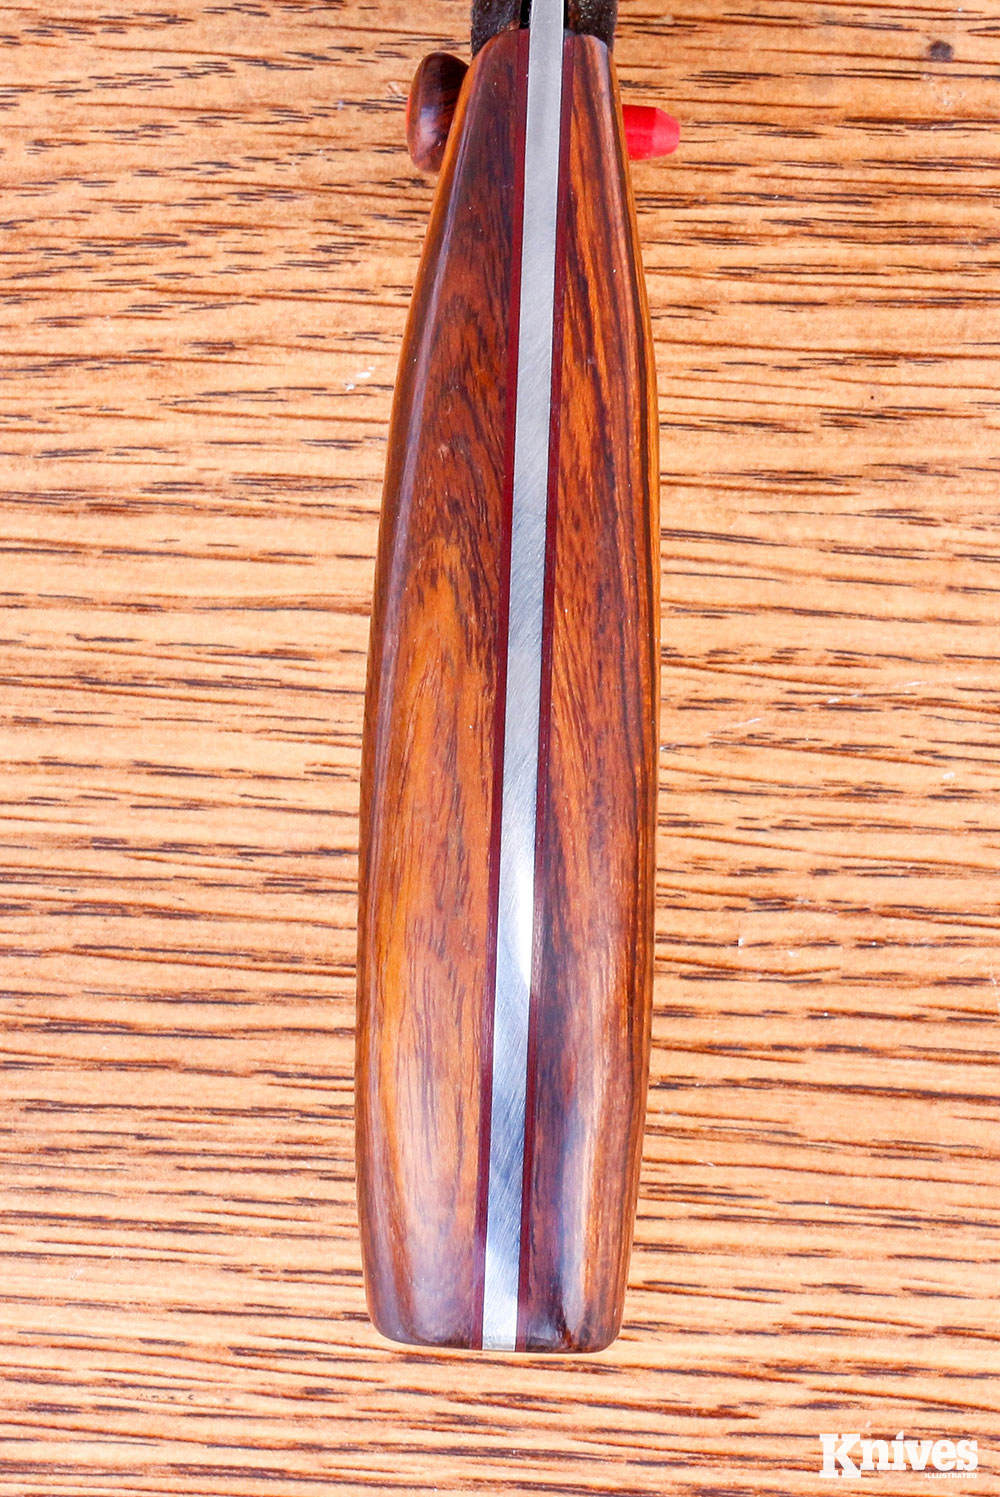 The attractive handle on the knife the author tested was made of desert ironwood. It was sufficiently thick and well contoured to give the knife a good feel in use.